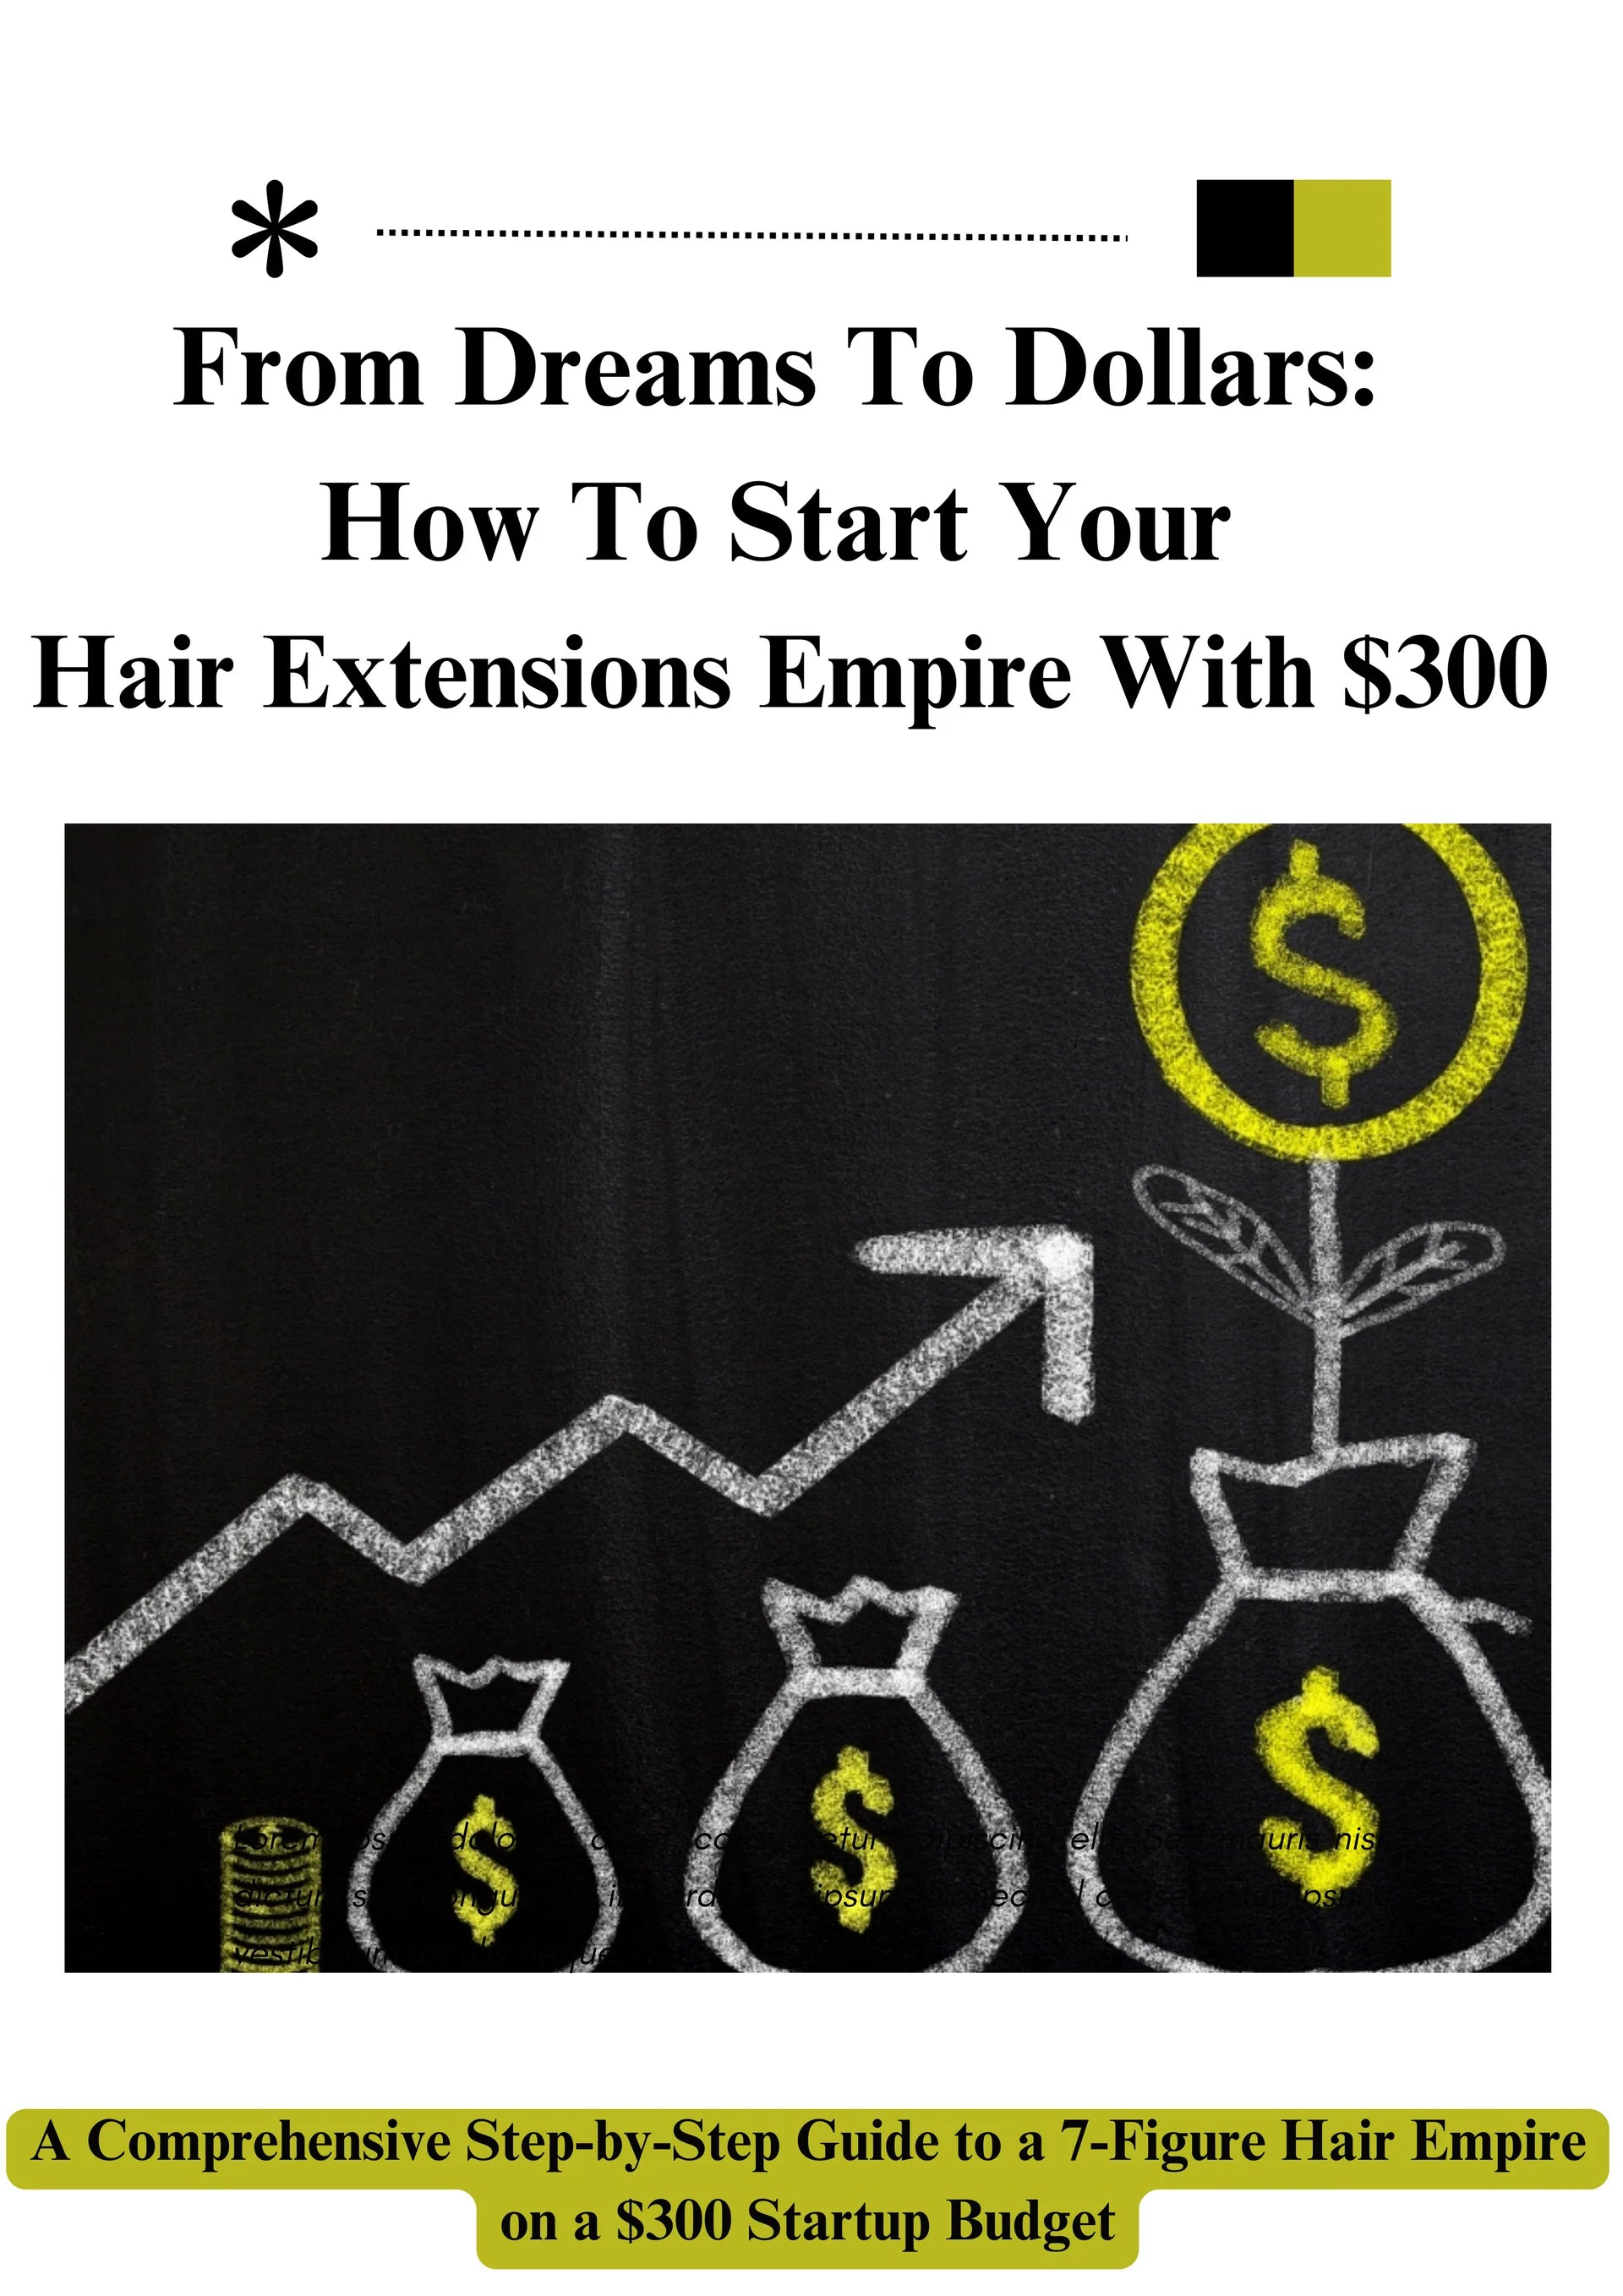 How To Start Your Hair Empire With A $300 Budget